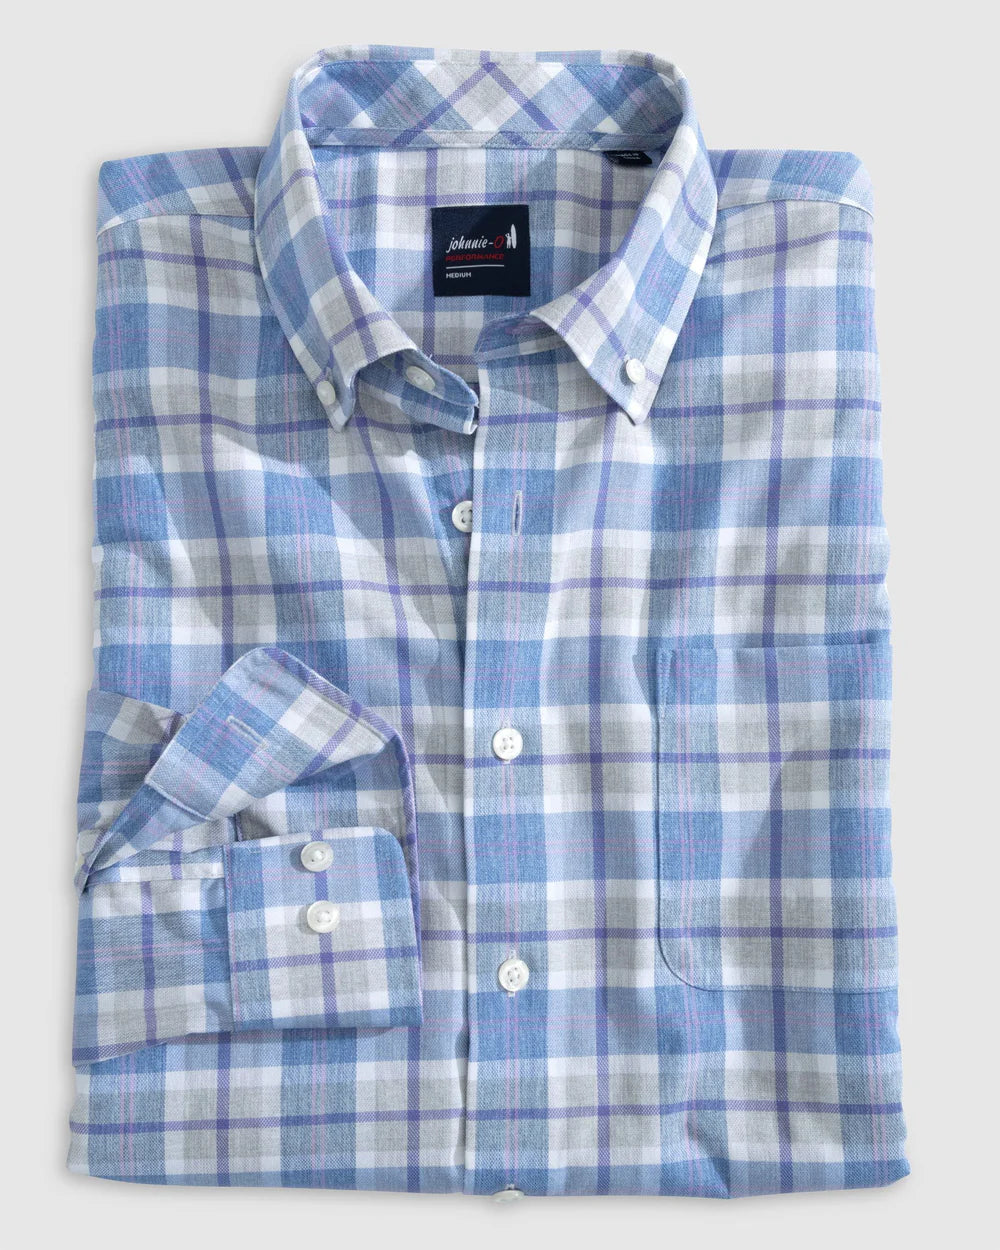 Johnnie-O Dume Performance Button Up Shirt in Wake